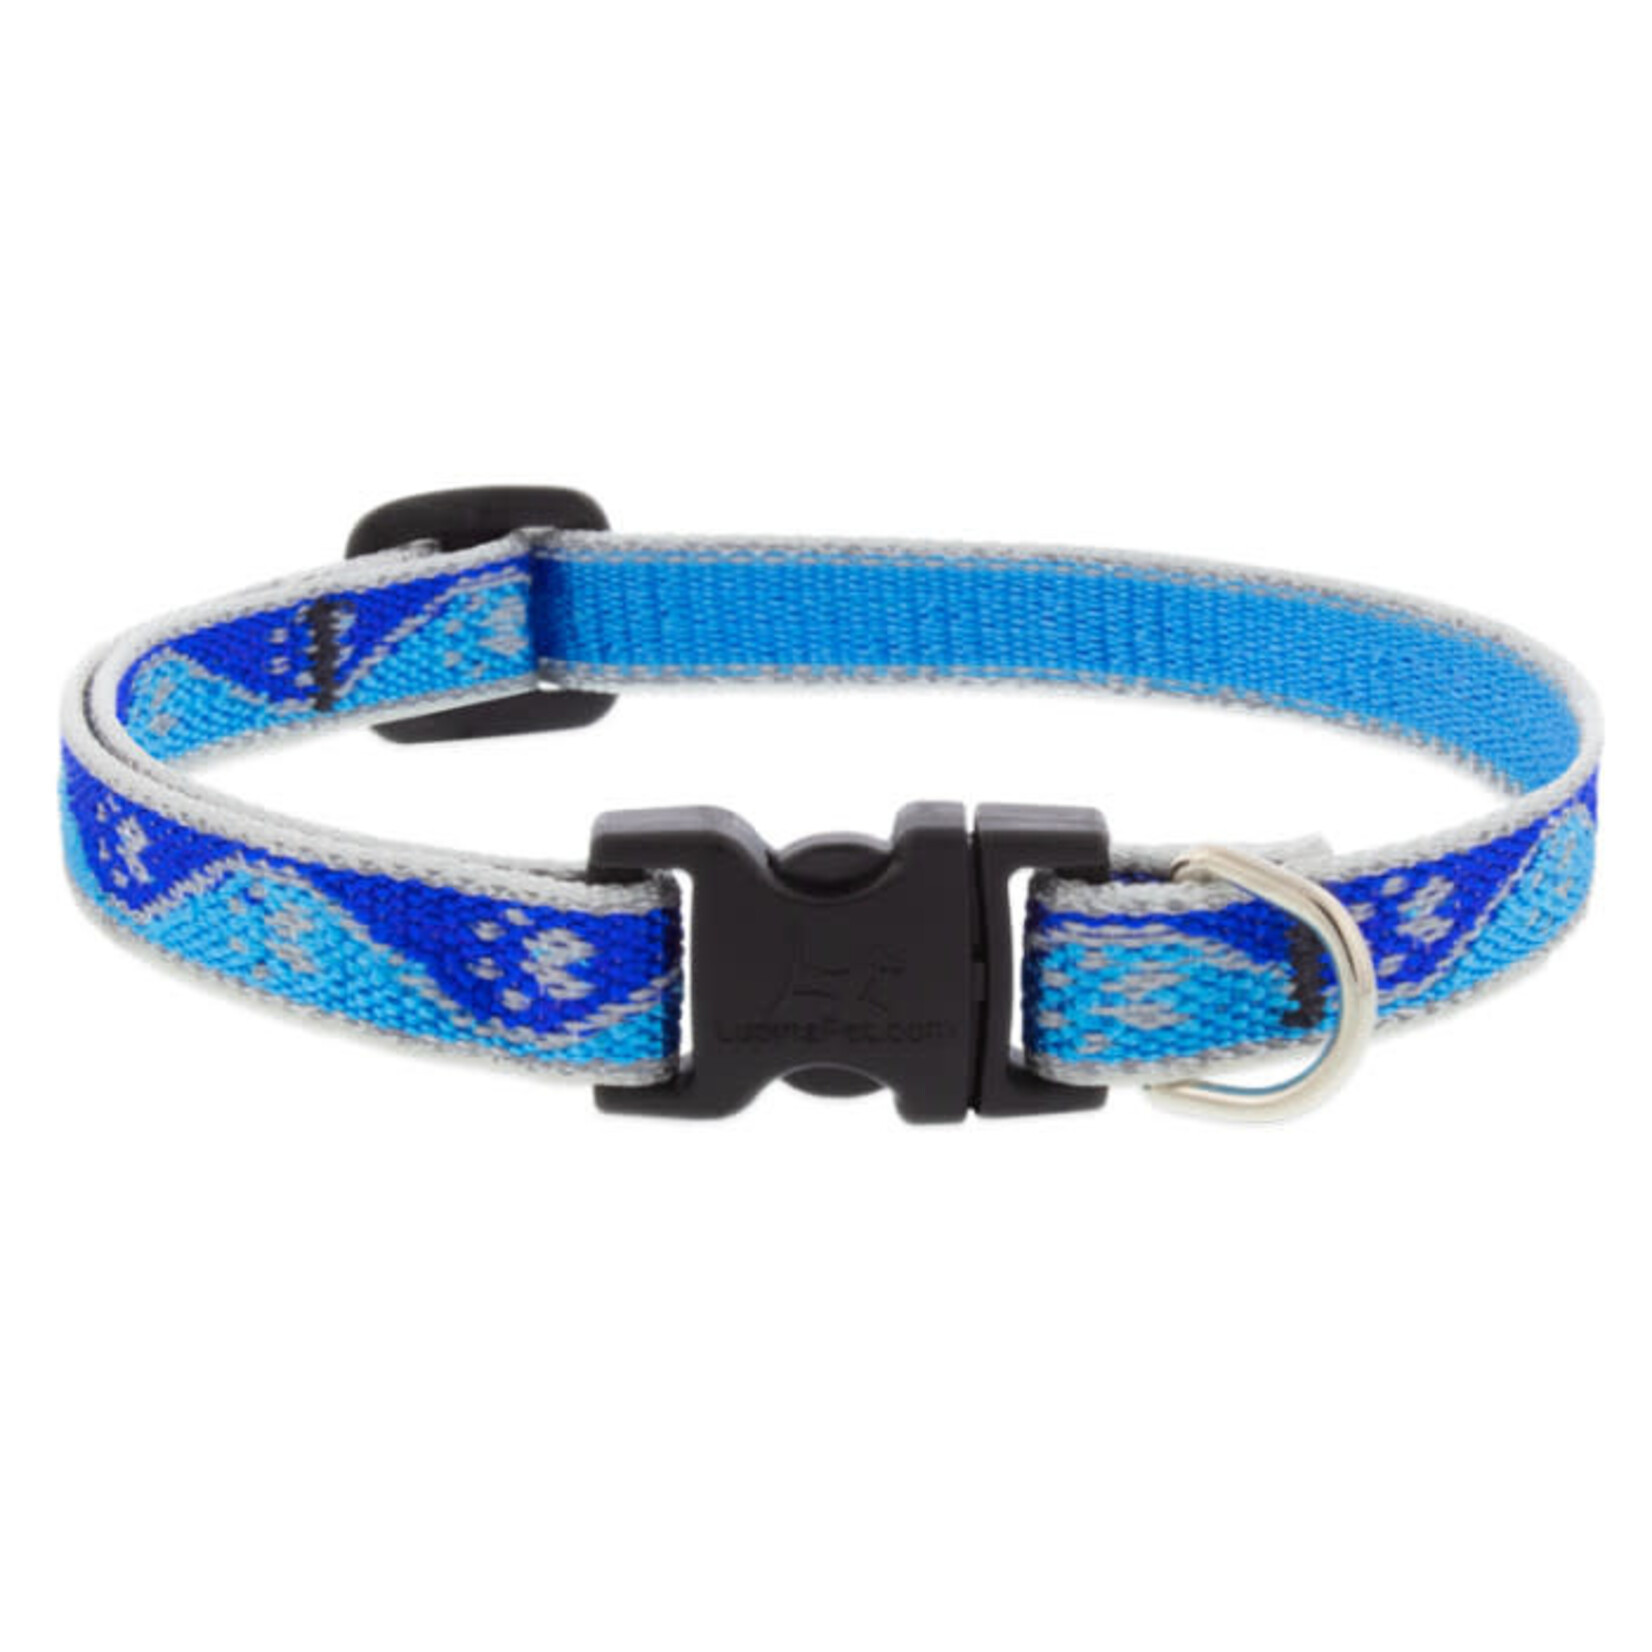 Lupine Lupine High Lights Blue Paws 1/2 in x 10-16 in Adjustable Collar